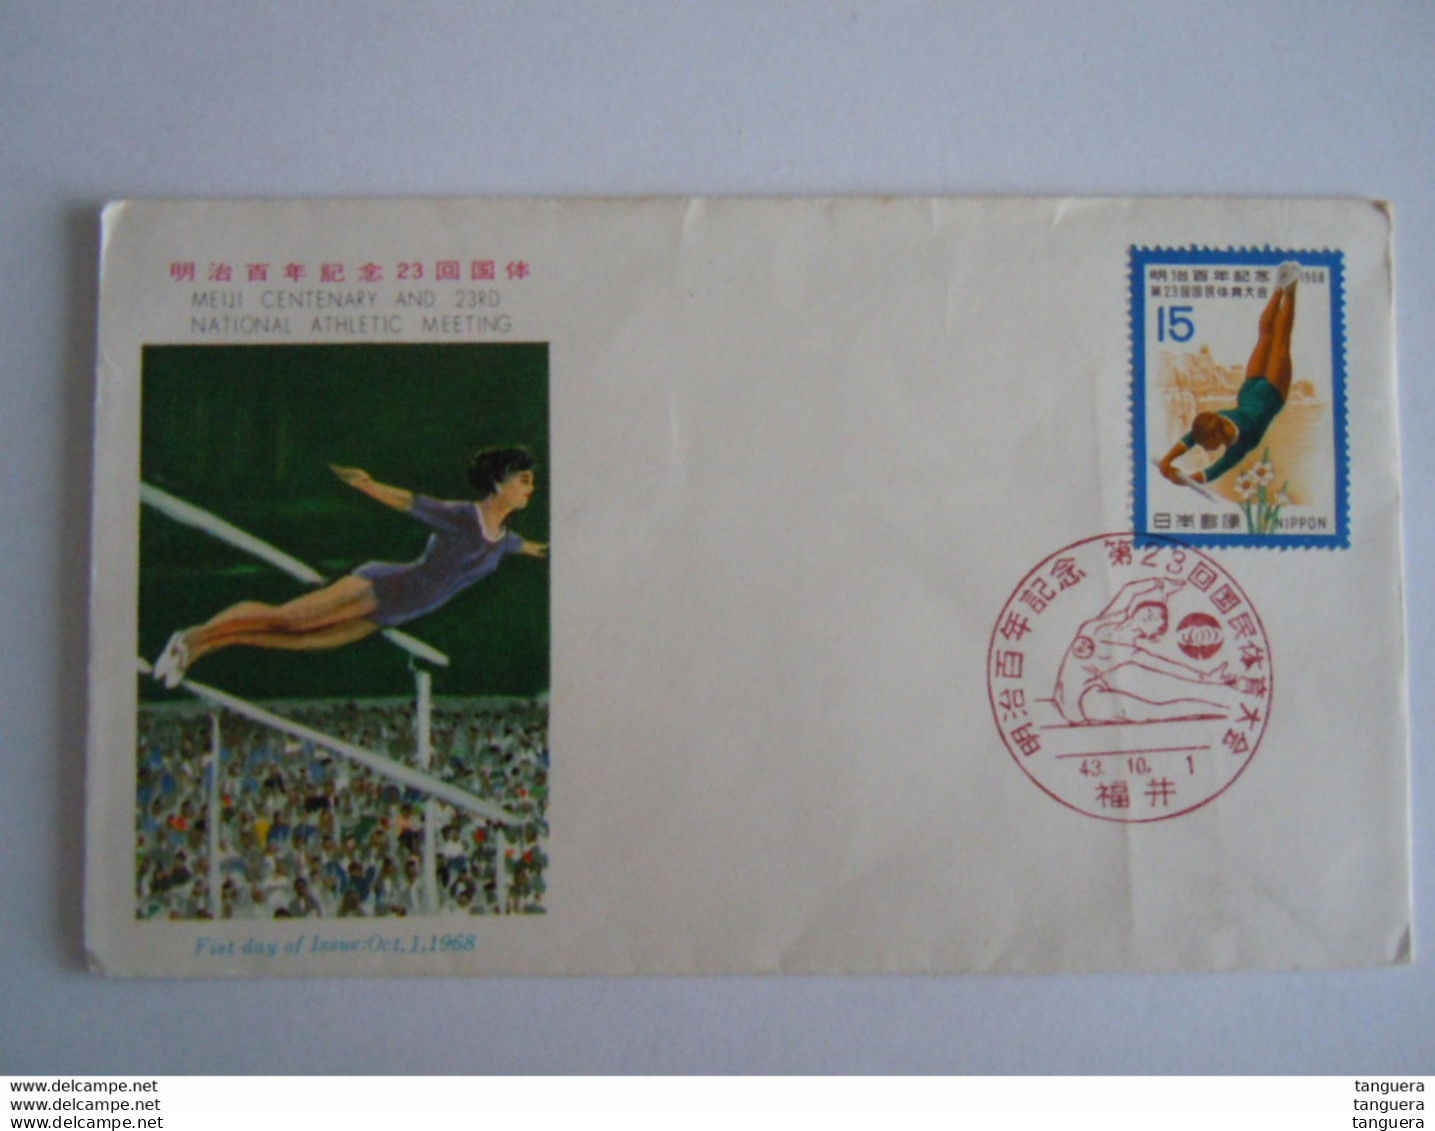 Japan Japon 1968 FDC Athletic Meeting Rencontre Sportive Barre-fixe Yv 920 - FDC